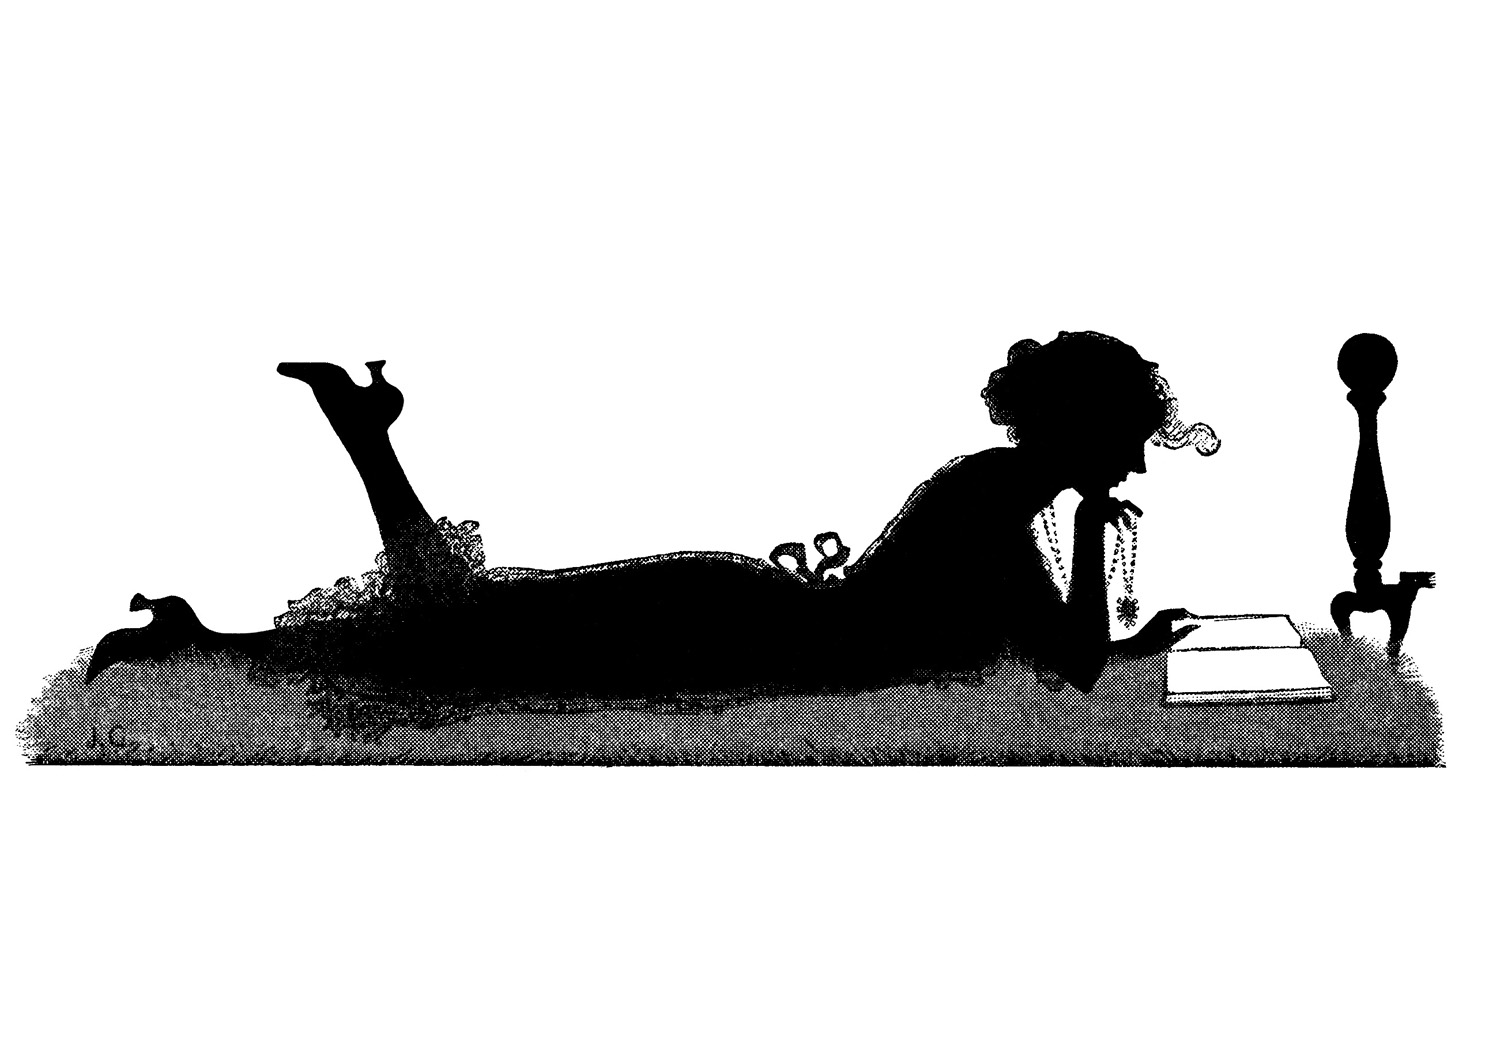 woman reading a book silhouette